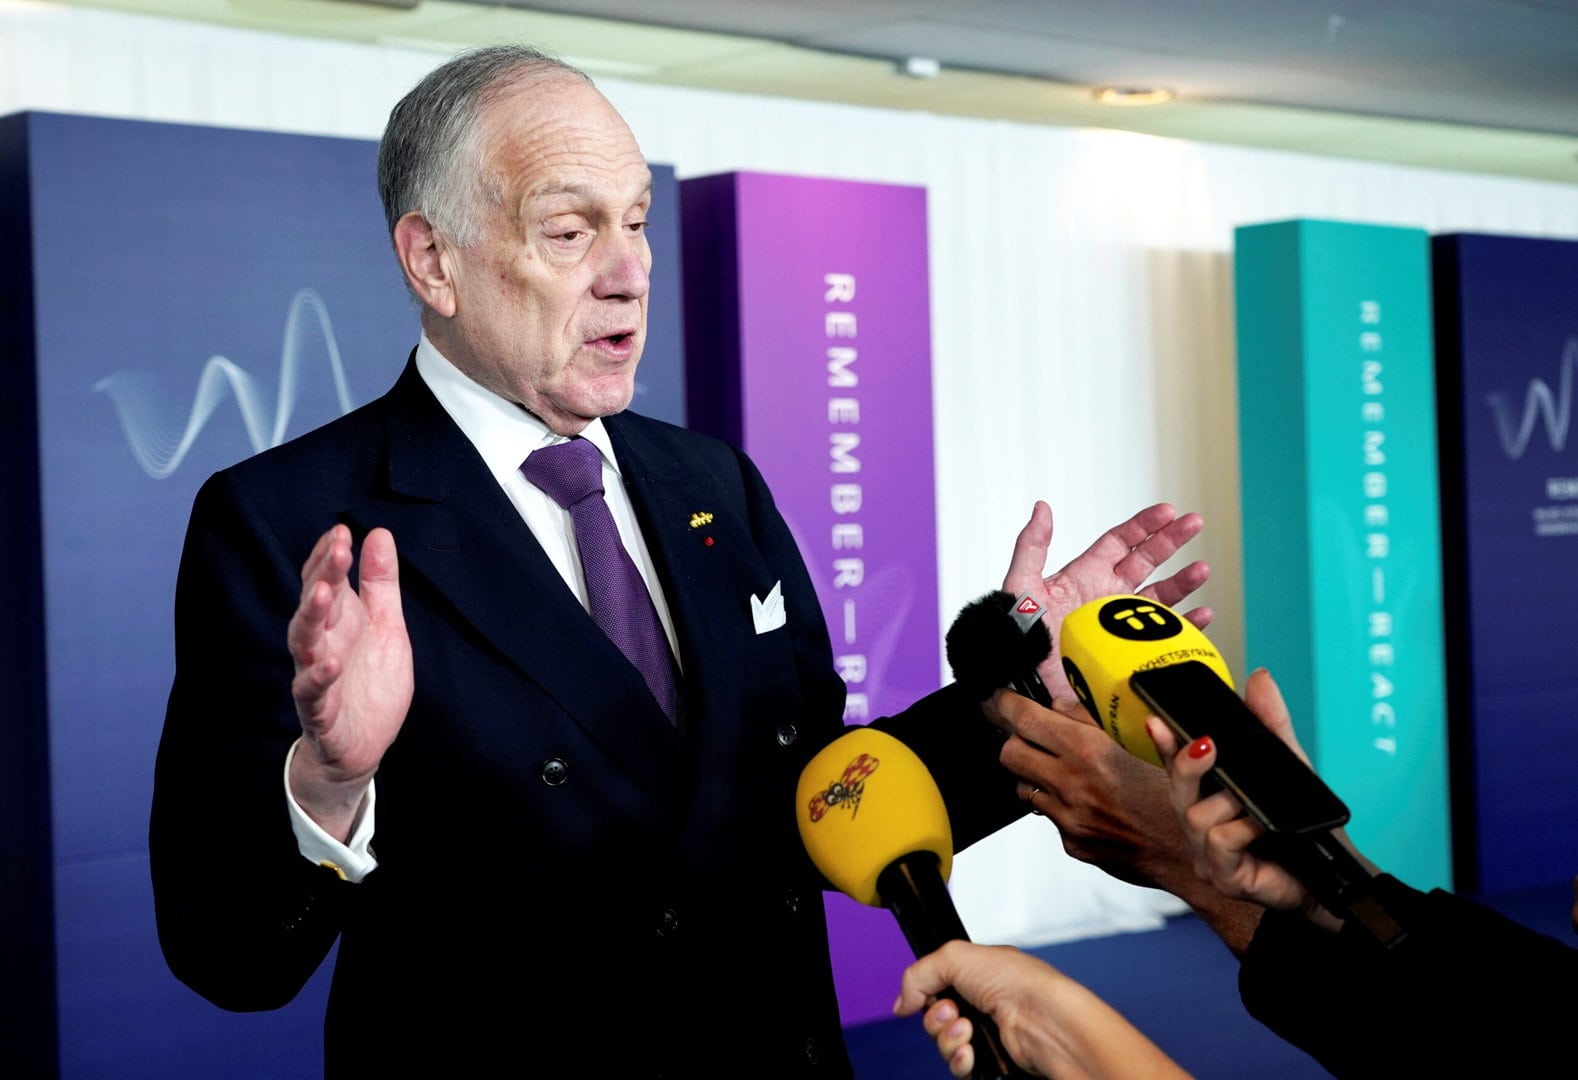 World Jewish Congress President Ronald S. Lauder speaks to members of the media at the Malmo International Forum on Holocaust Remembrance and Combating Antisemitism in Malmo, Sweden, October 13, 2021. Jonas Ekstromer/TT News Agency/via REUTERS      ATTENTION EDITORS - THIS IMAGE WAS PROVIDED BY A THIRD PARTY. SWEDEN OUT. NO COMMERCIAL OR EDITORIAL SALES IN SWEDEN. - RC2W8Q9V1FKG